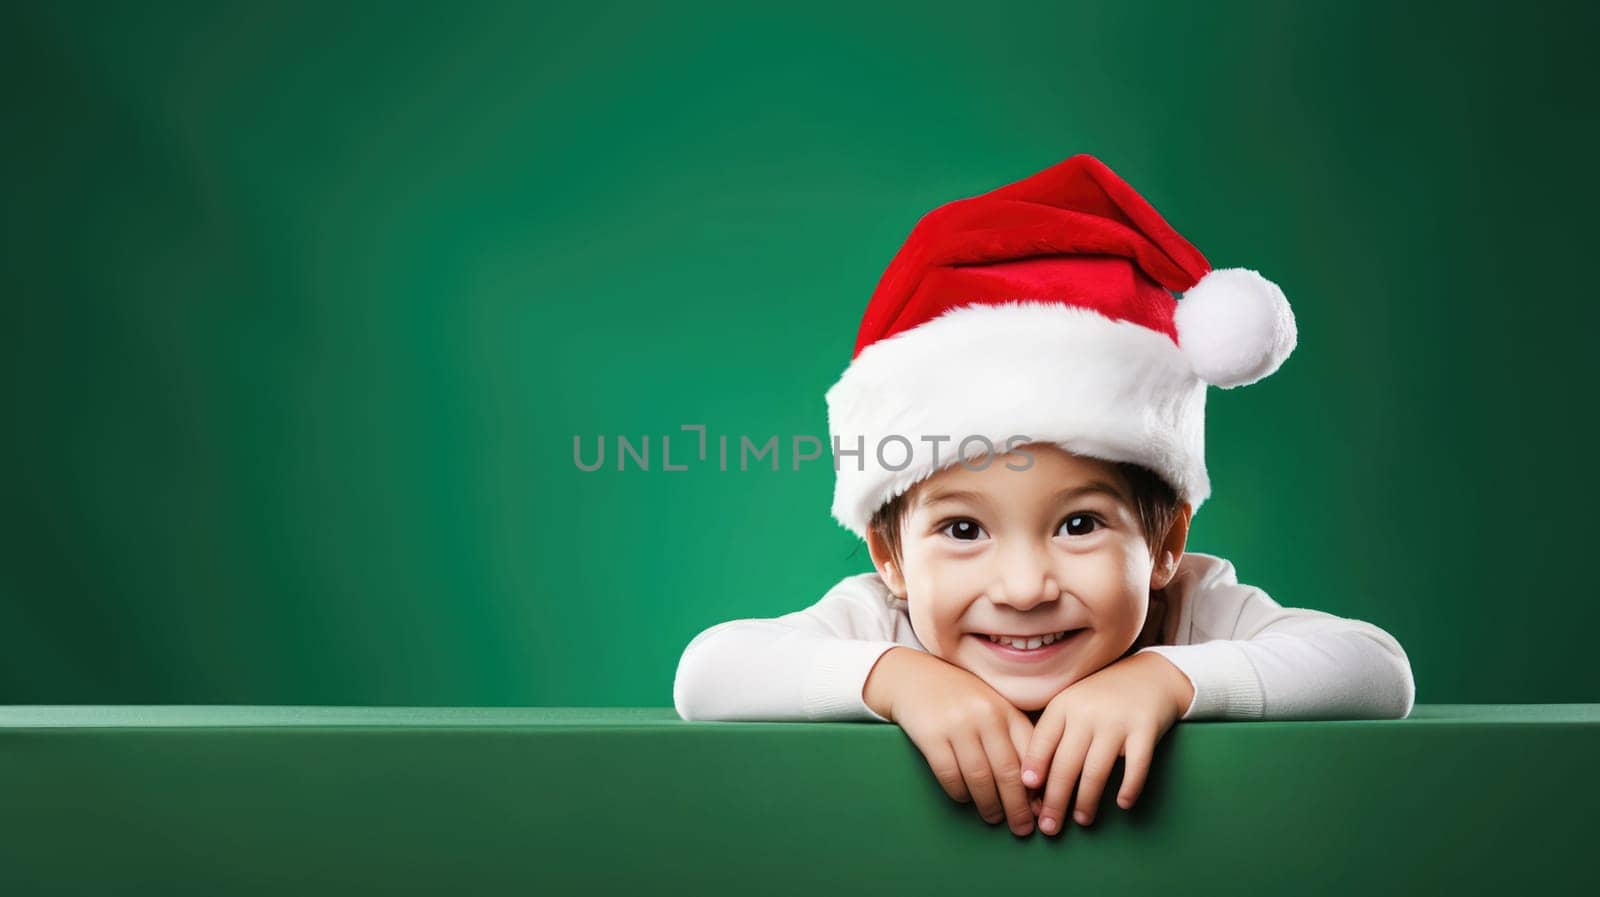 Surprised child in Santa hat hiding behind green advertisement board, Copy space for text or design, kid peeking out blank banner